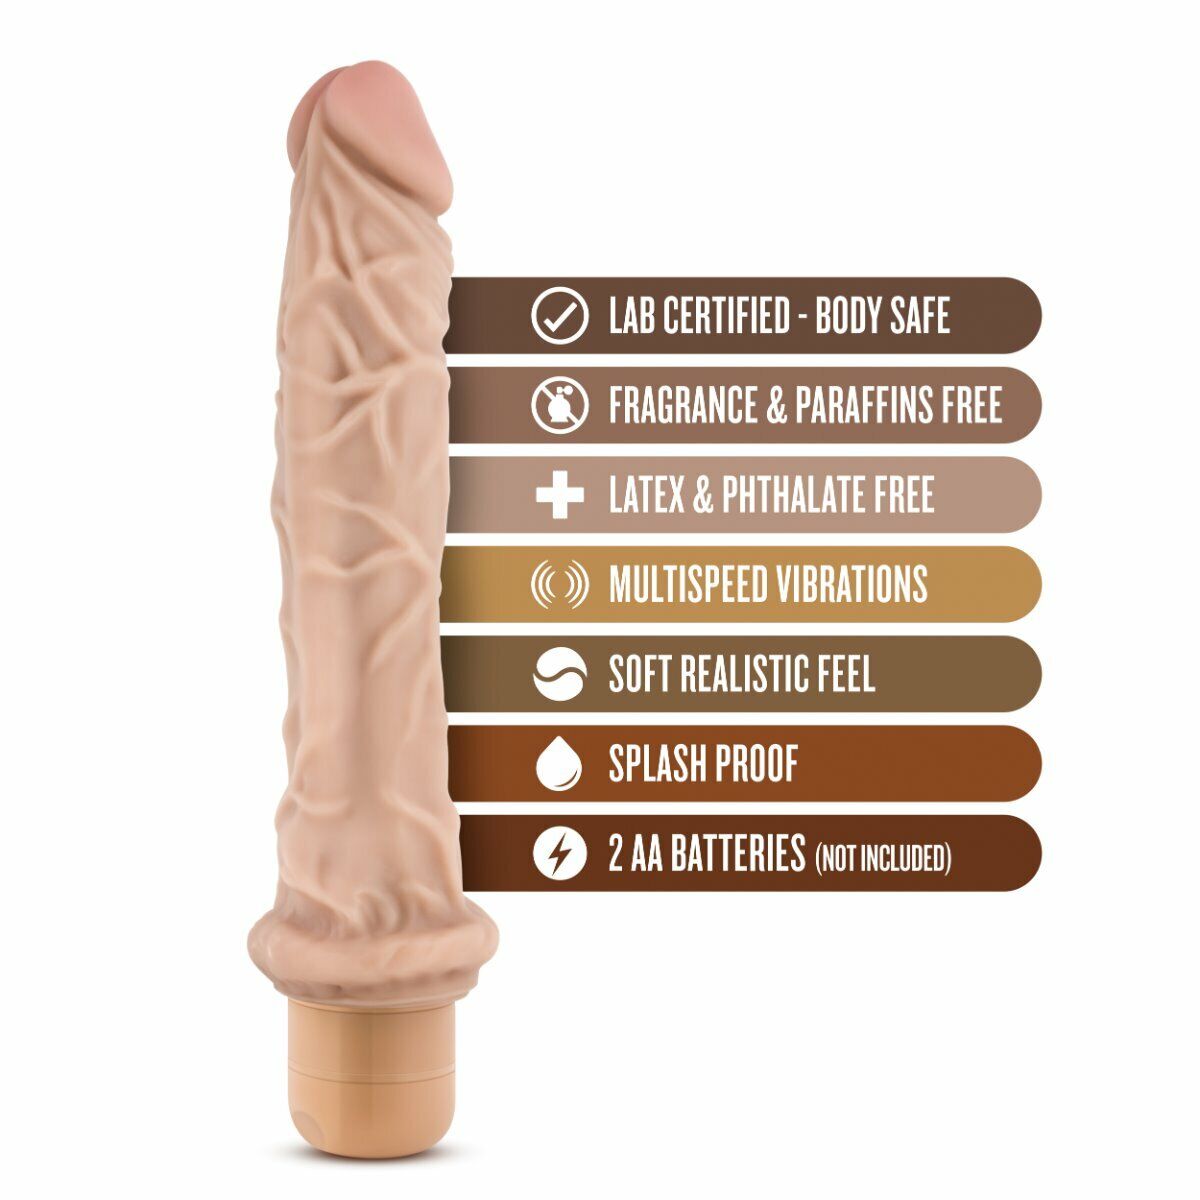 Dr Skin Realistic Cock Vibe Vibrating G-spot Anal Dildo Sex-toy for Women Couple